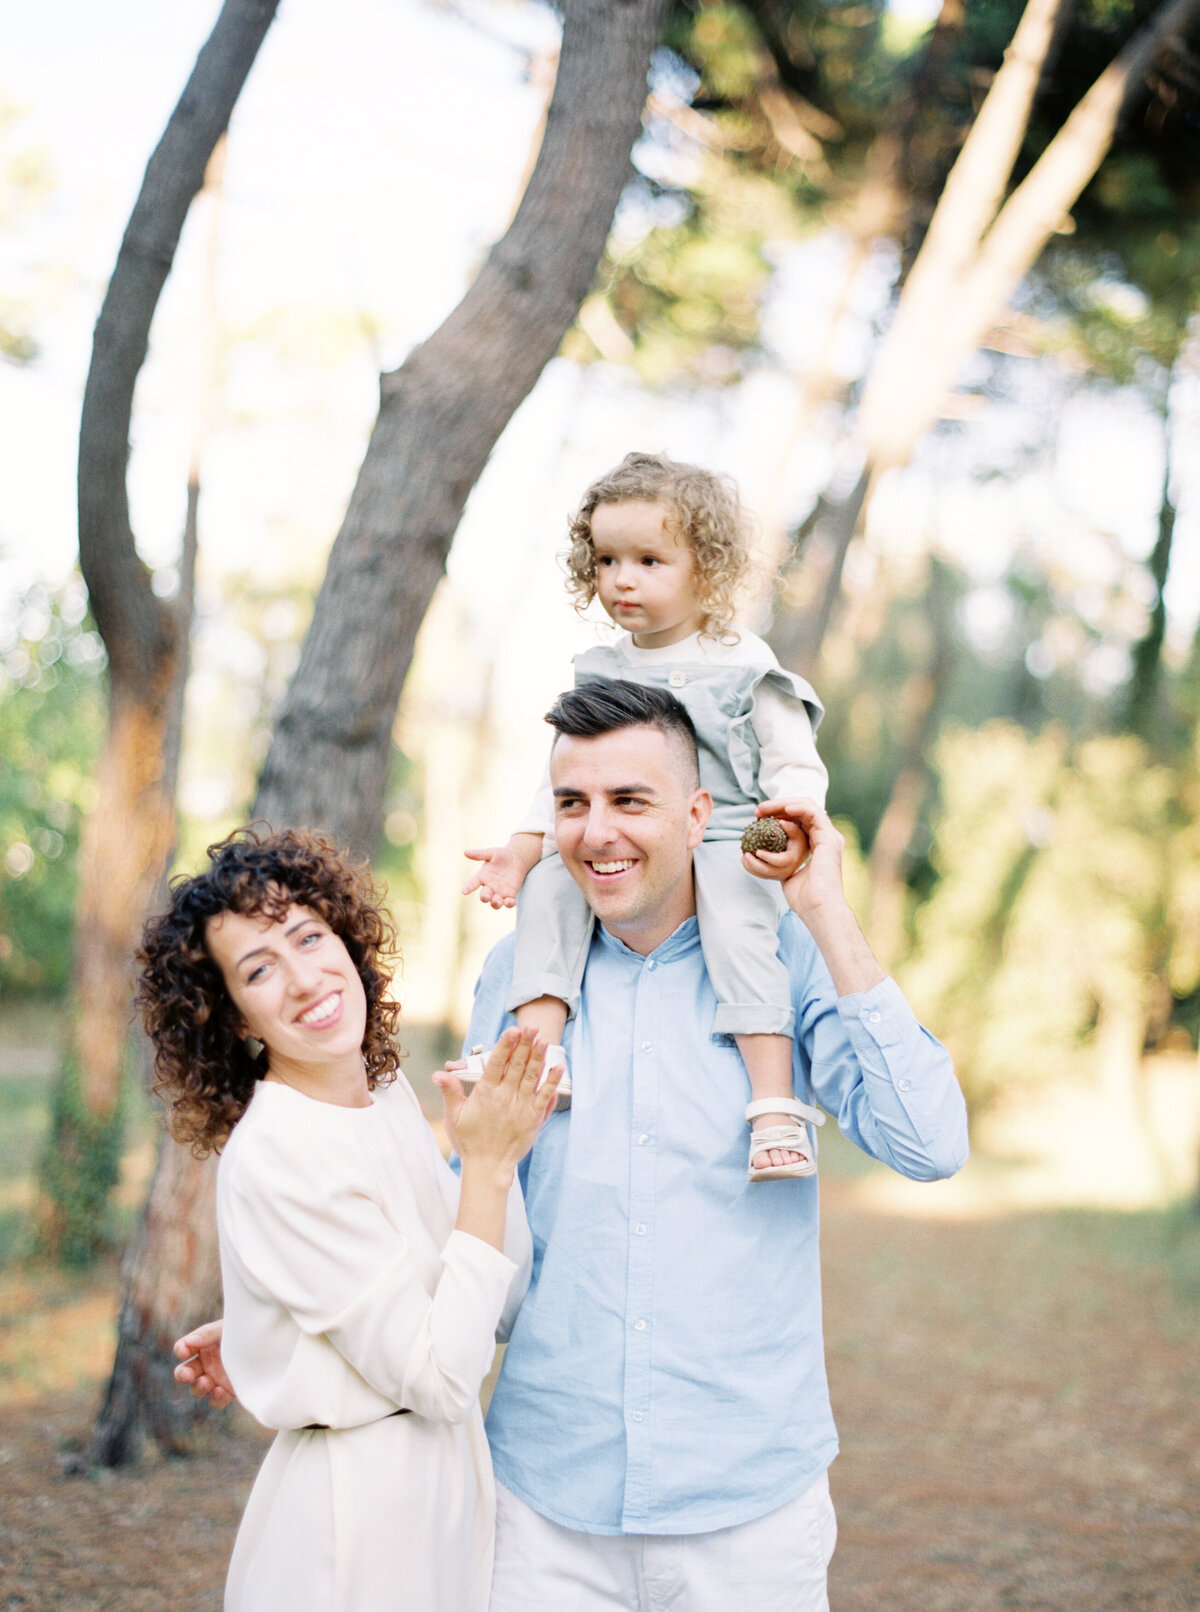 Family photography session outdoors in Cesenatico, Emilia-Romagna, Italy - 2